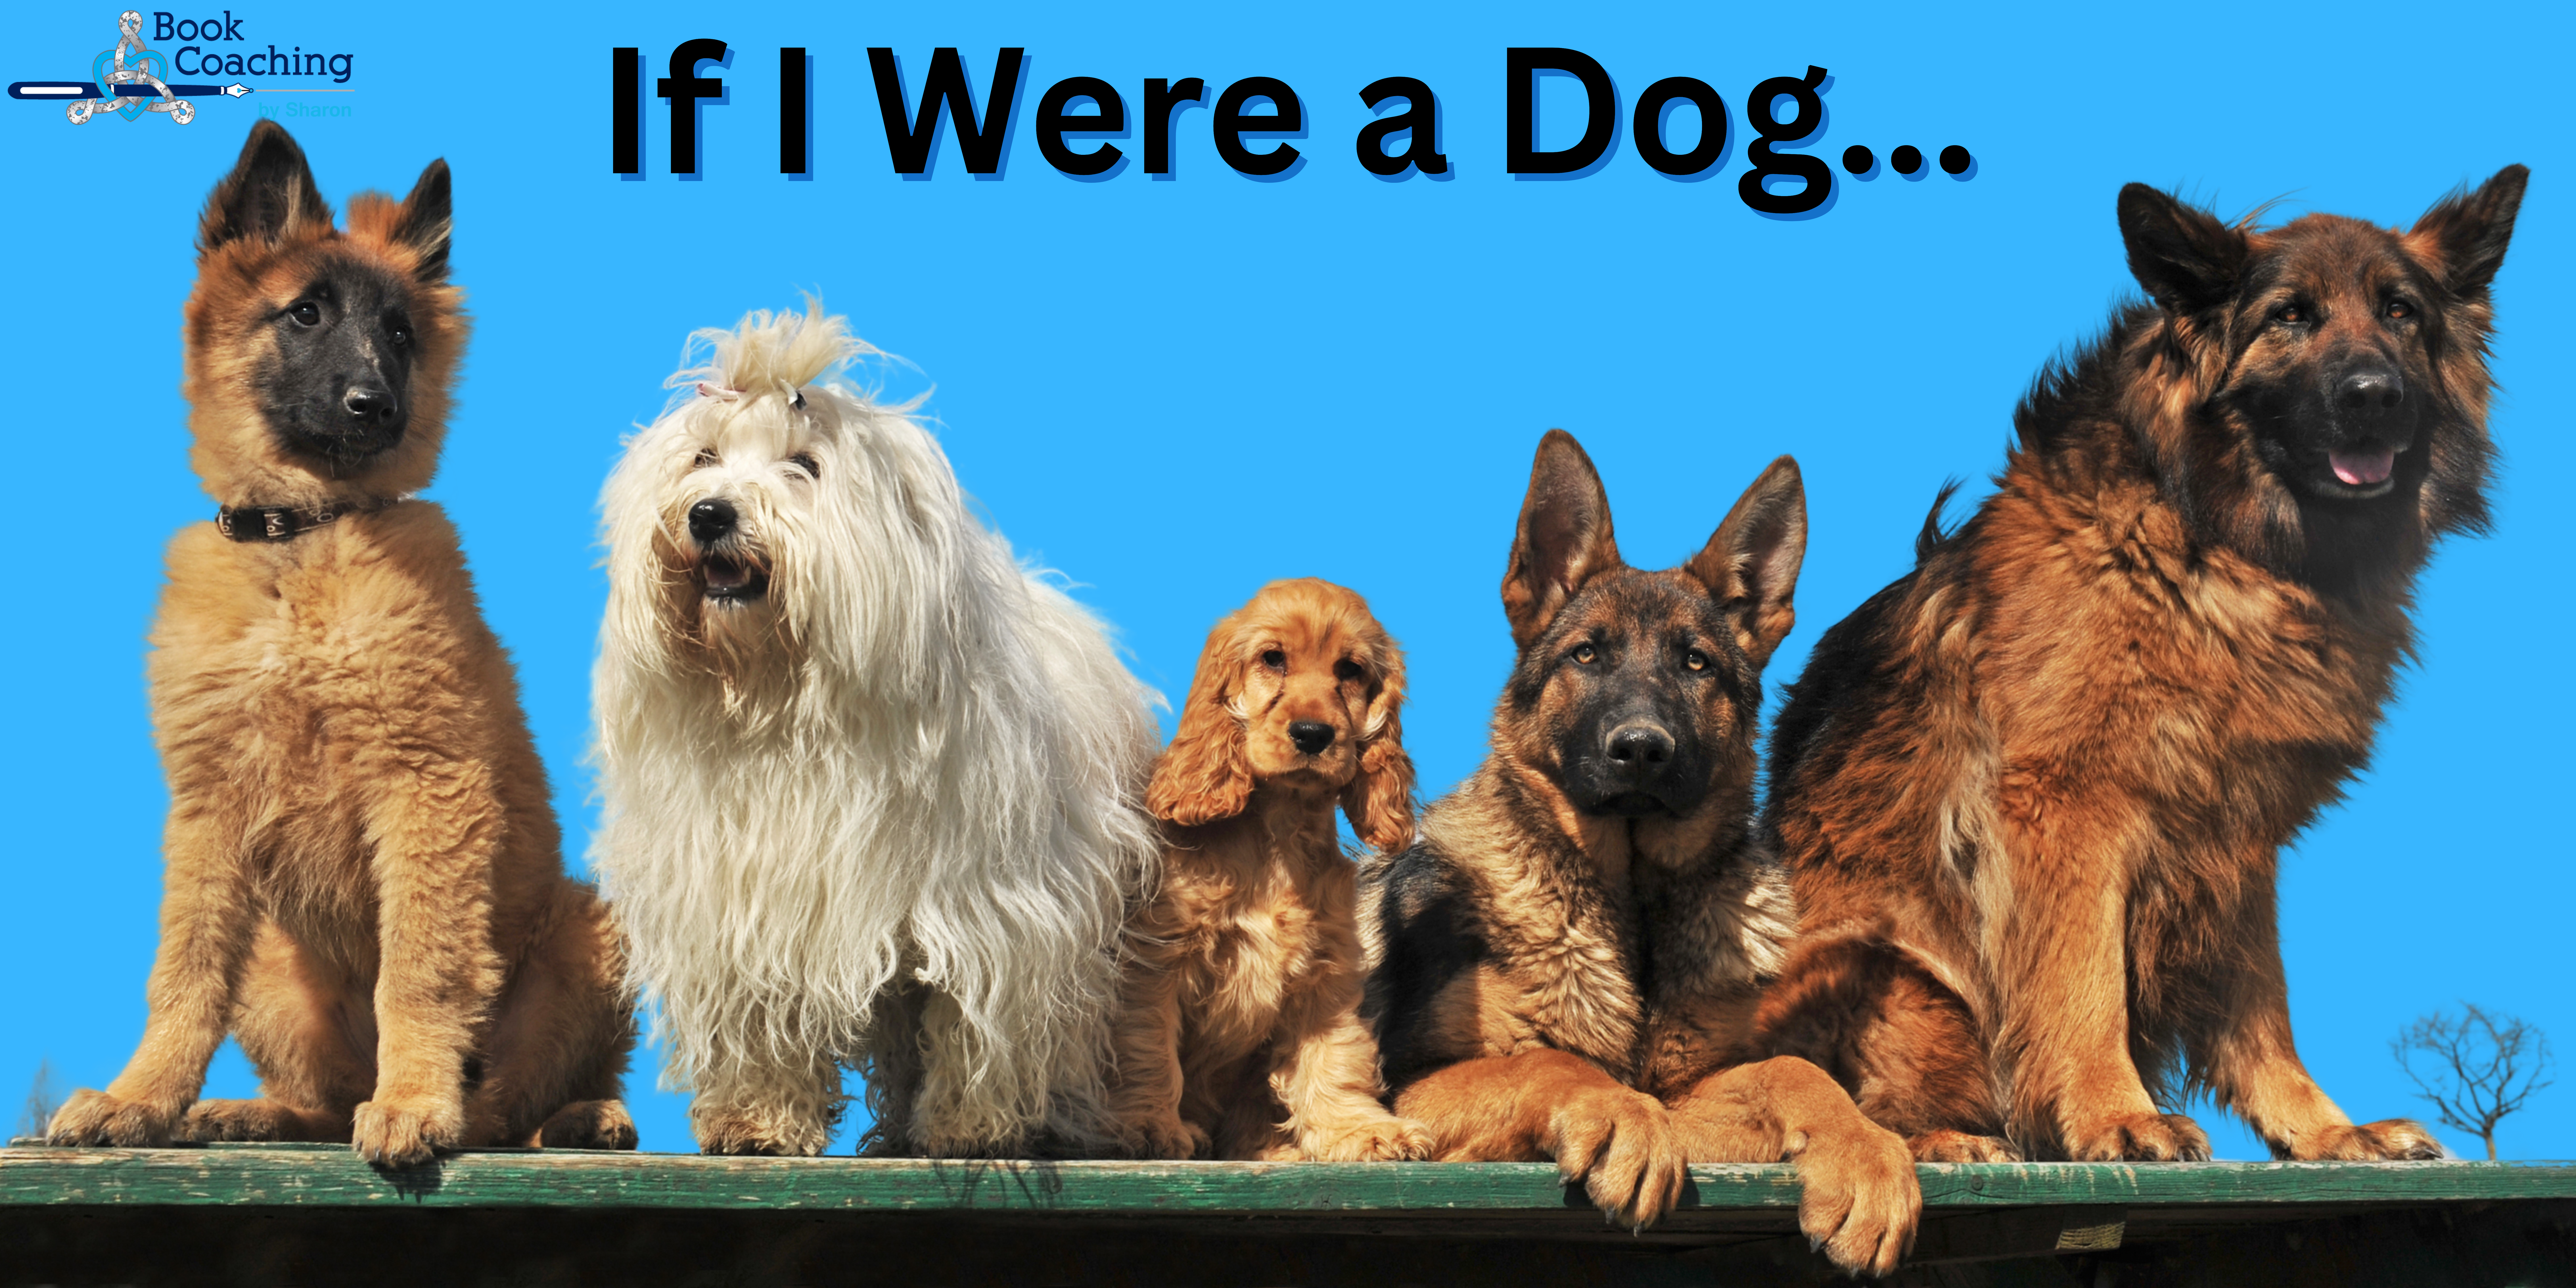 Image of five different breeds of dog sitting on a bench against a blue background with the book coaching by Sharon logo in the upper left-hand corner and a header that reads if I were a dog.